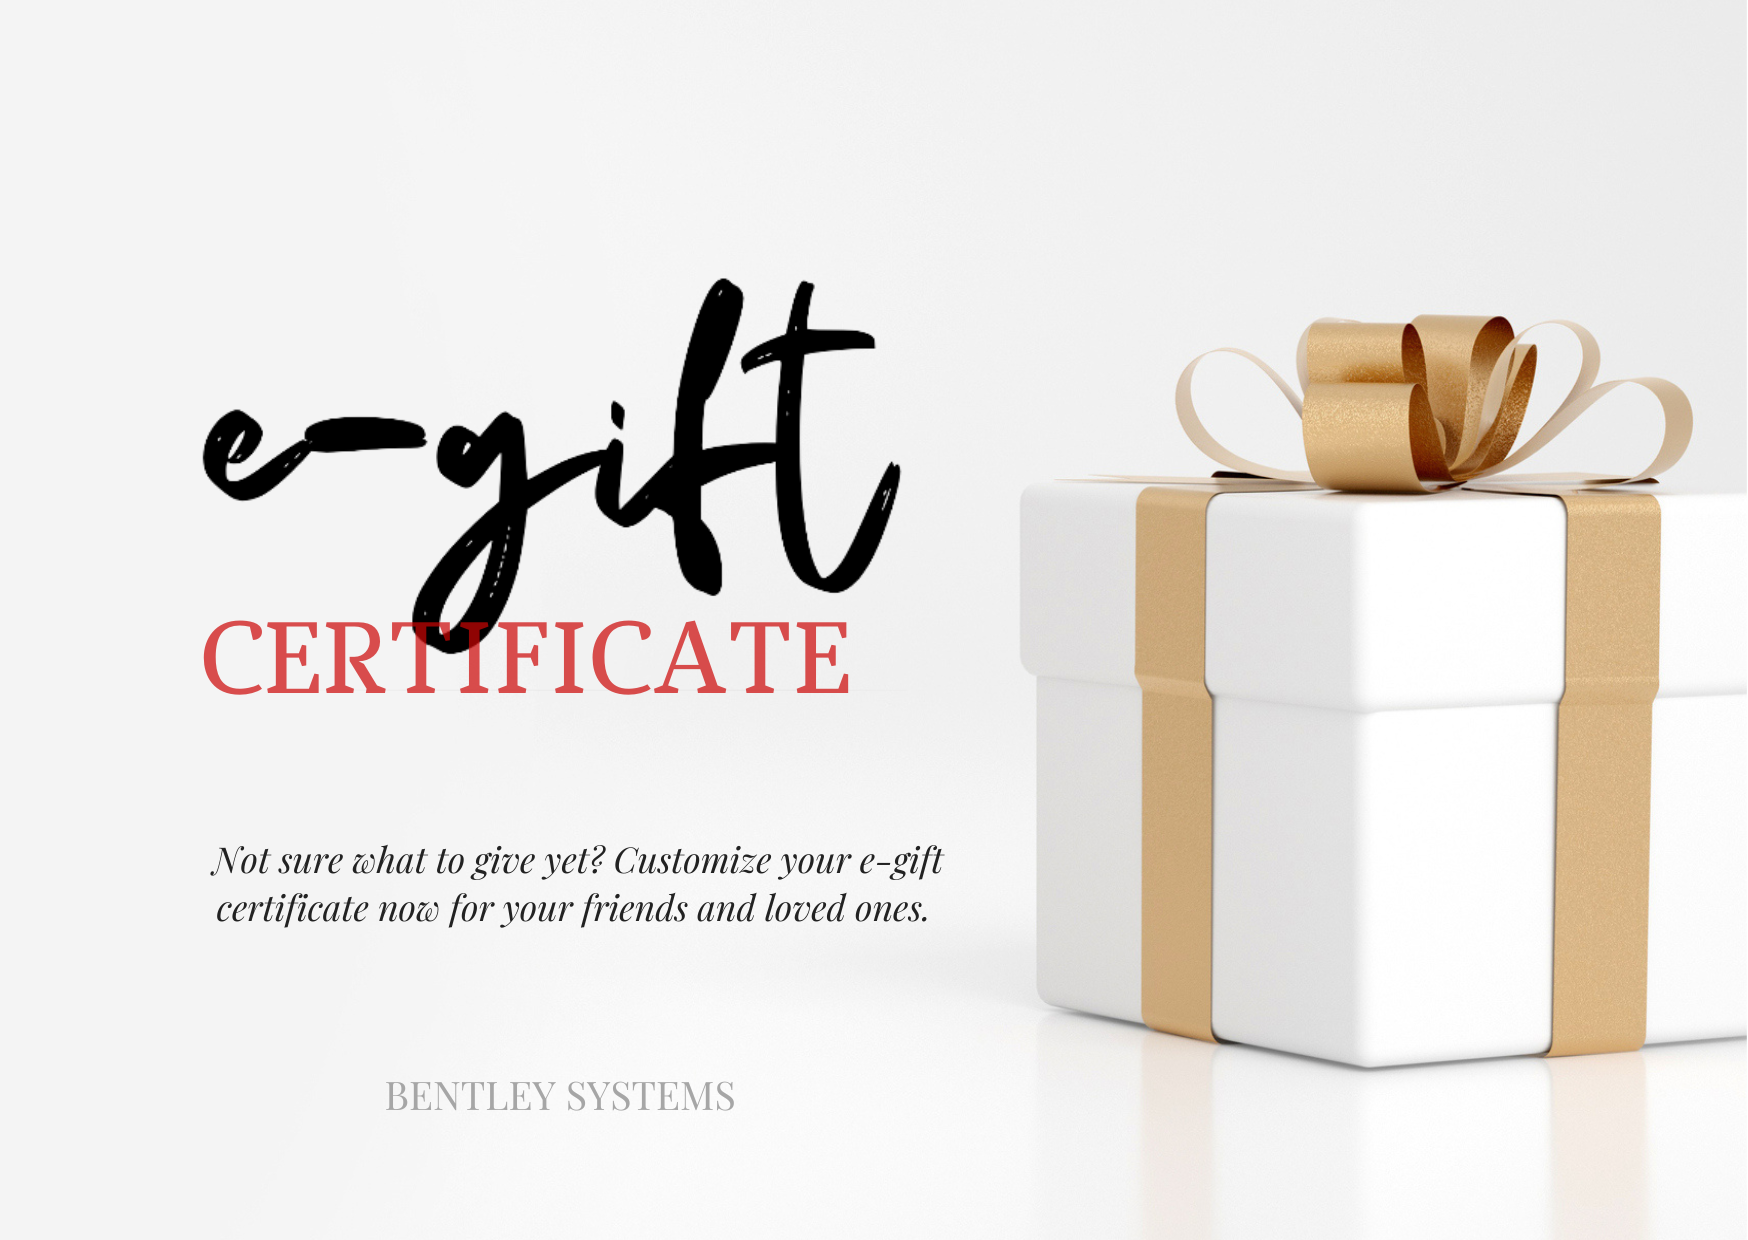 gift certificates available